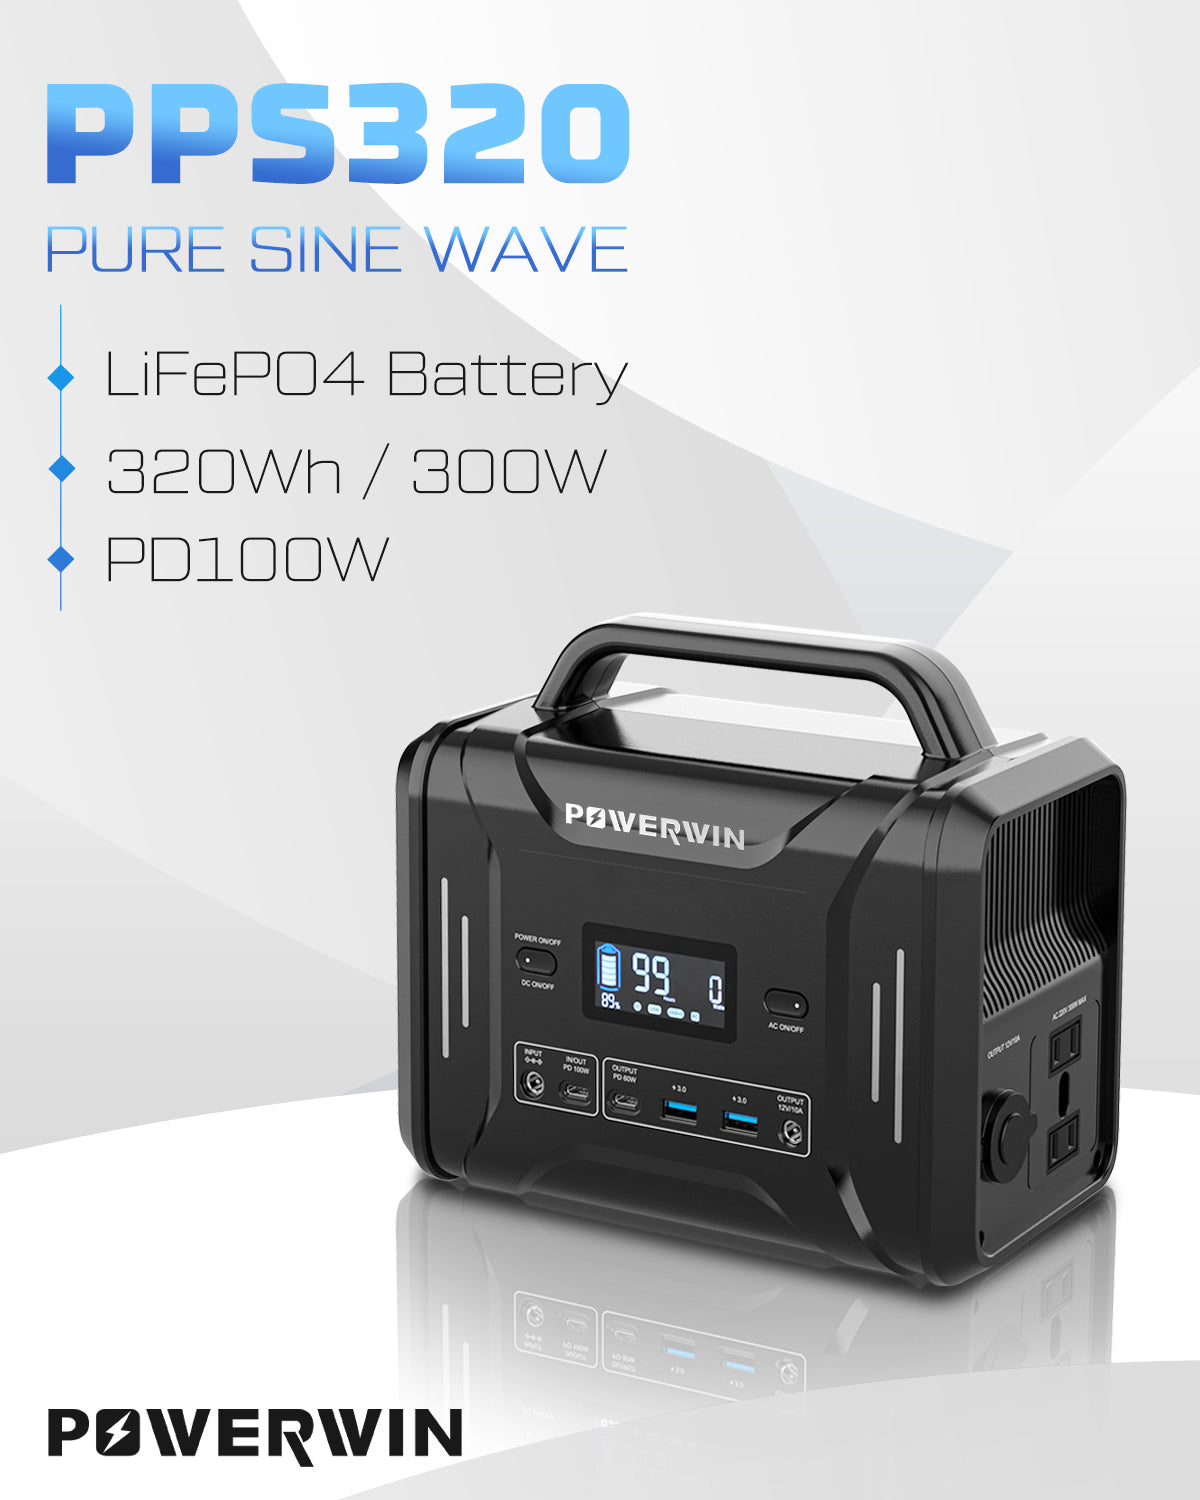 US POWERWIN Portable Power Station PPS320 for power supply